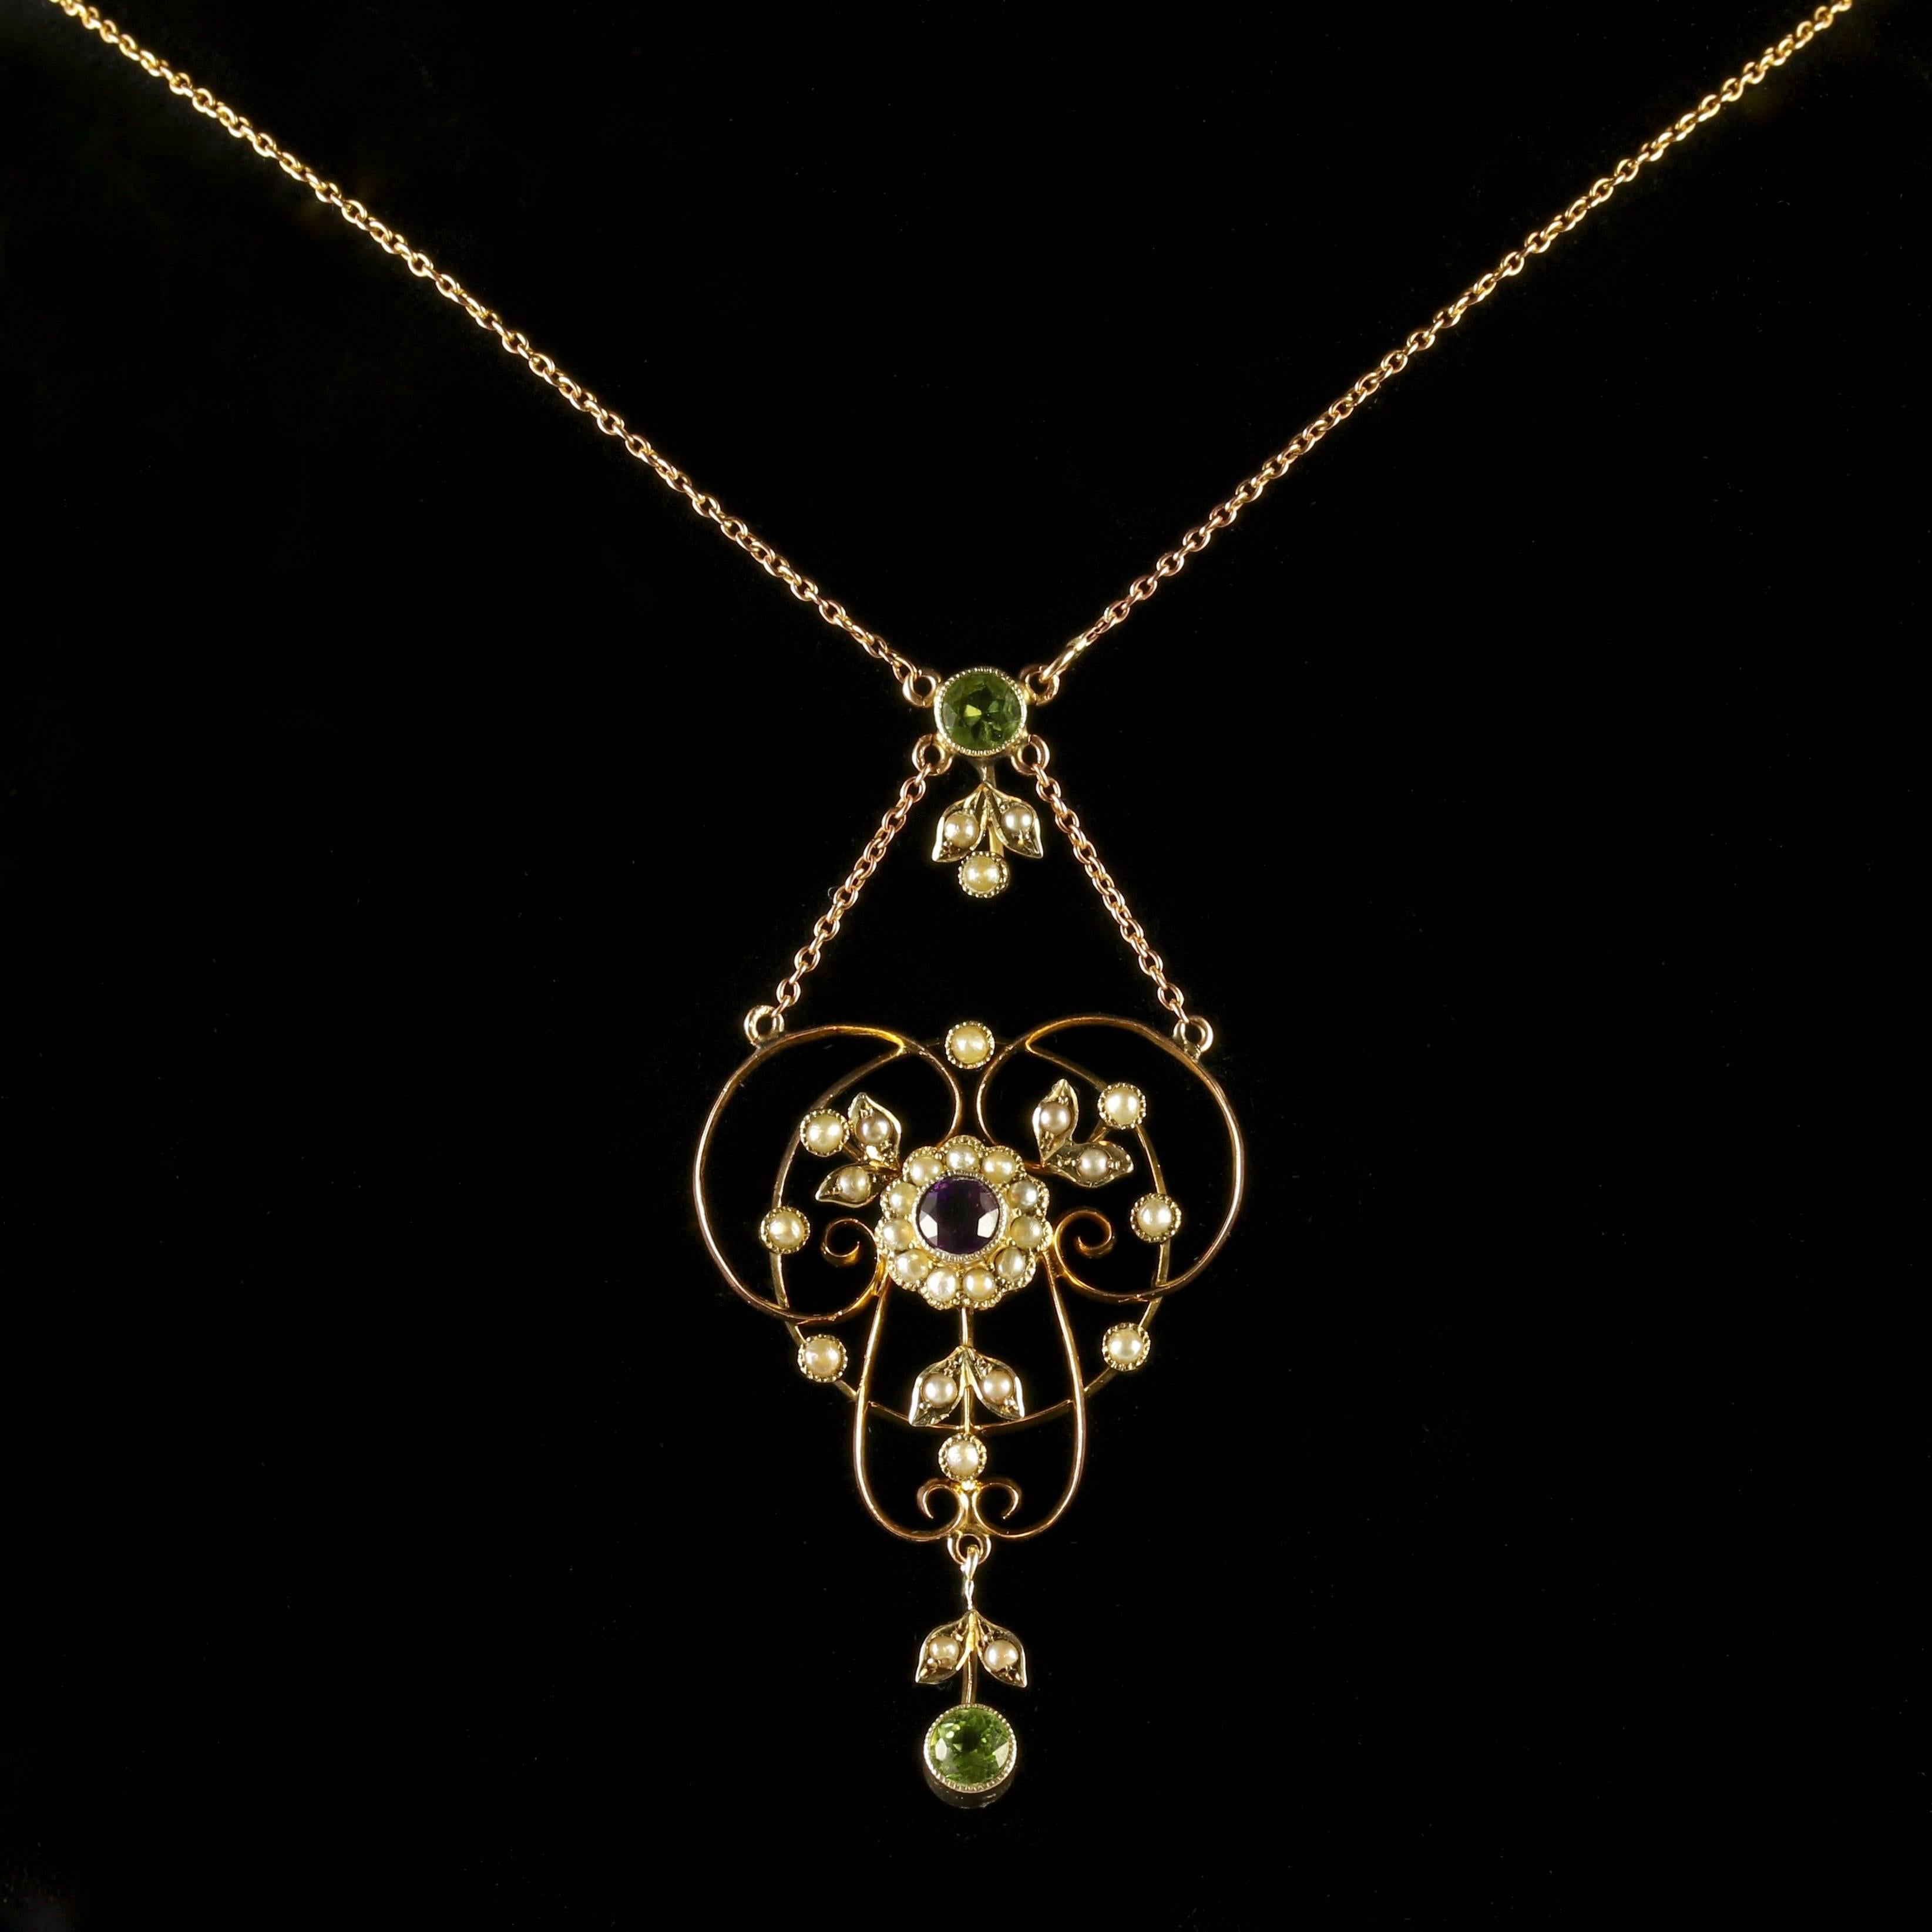 To read more please click continue reading below-

This genuine Victorian 9ct Yellow Gold Suffragette pendant necklace is Circa 1900.

Suffragettes liked to be depicted as feminine, their jewellery was chosen to counter the stereotypes put forward